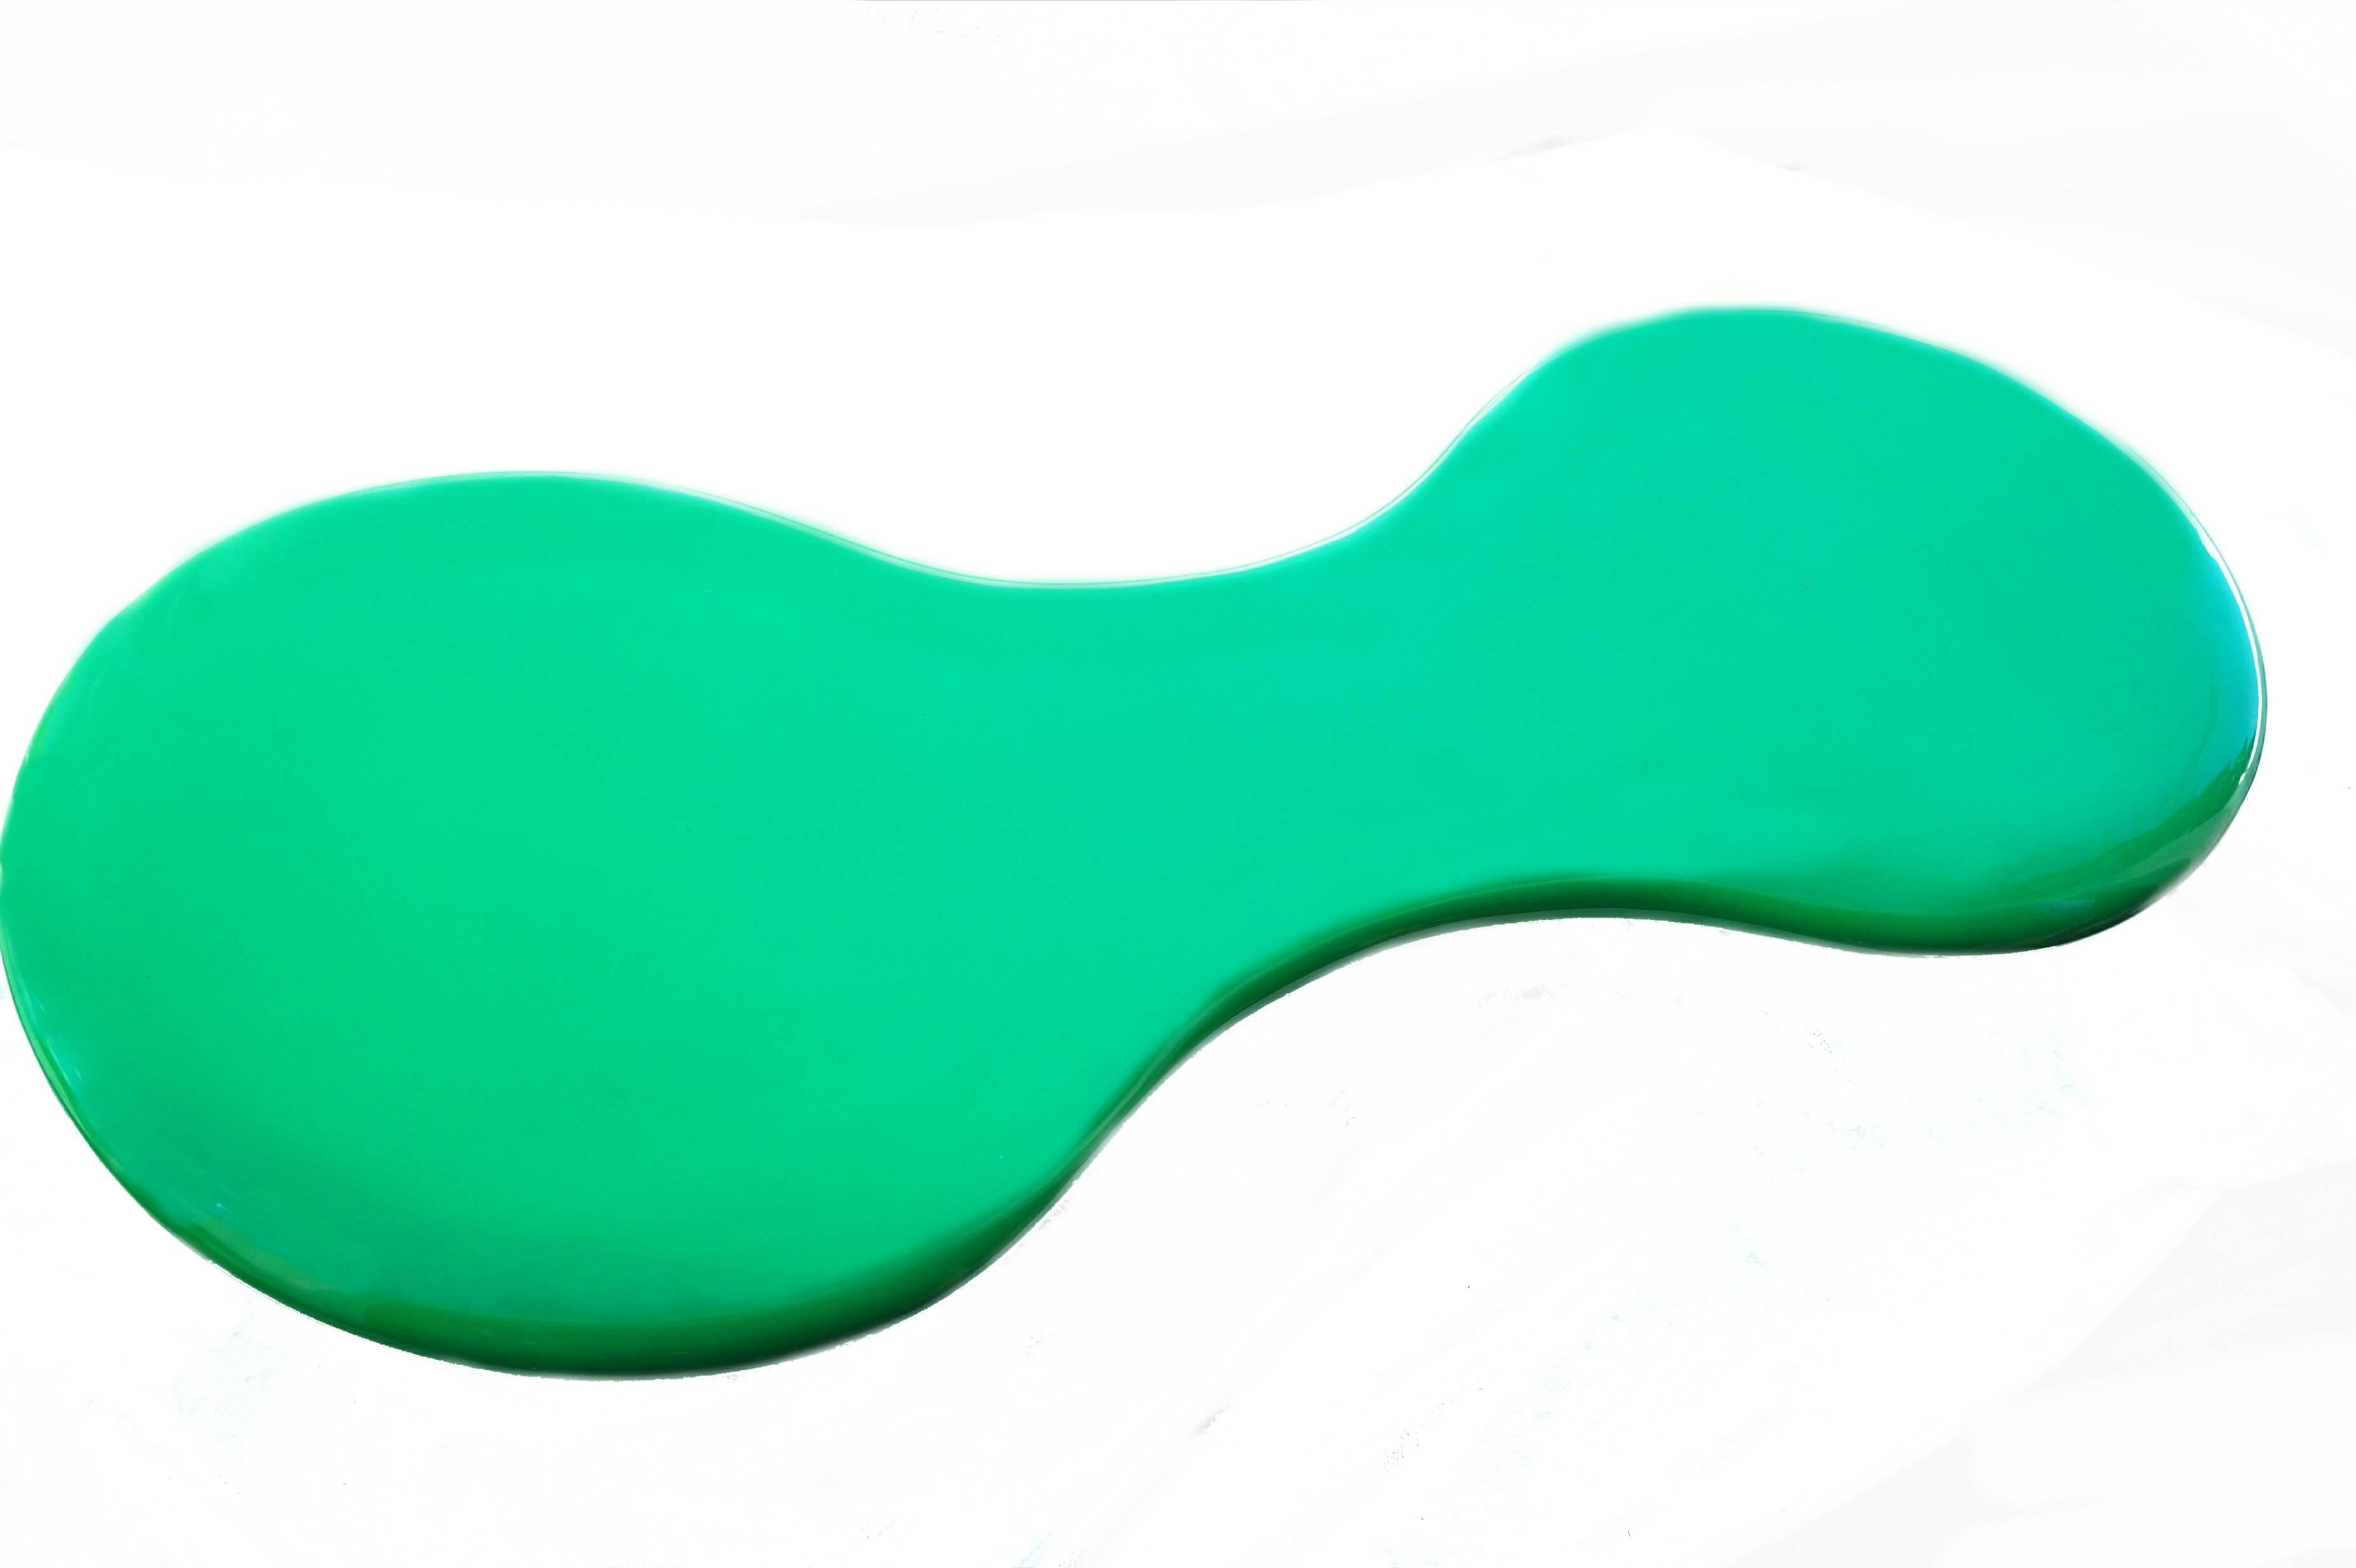 Marc Newson Orgone Chaise Green Longue Bench Scuptural for Cappellini 1